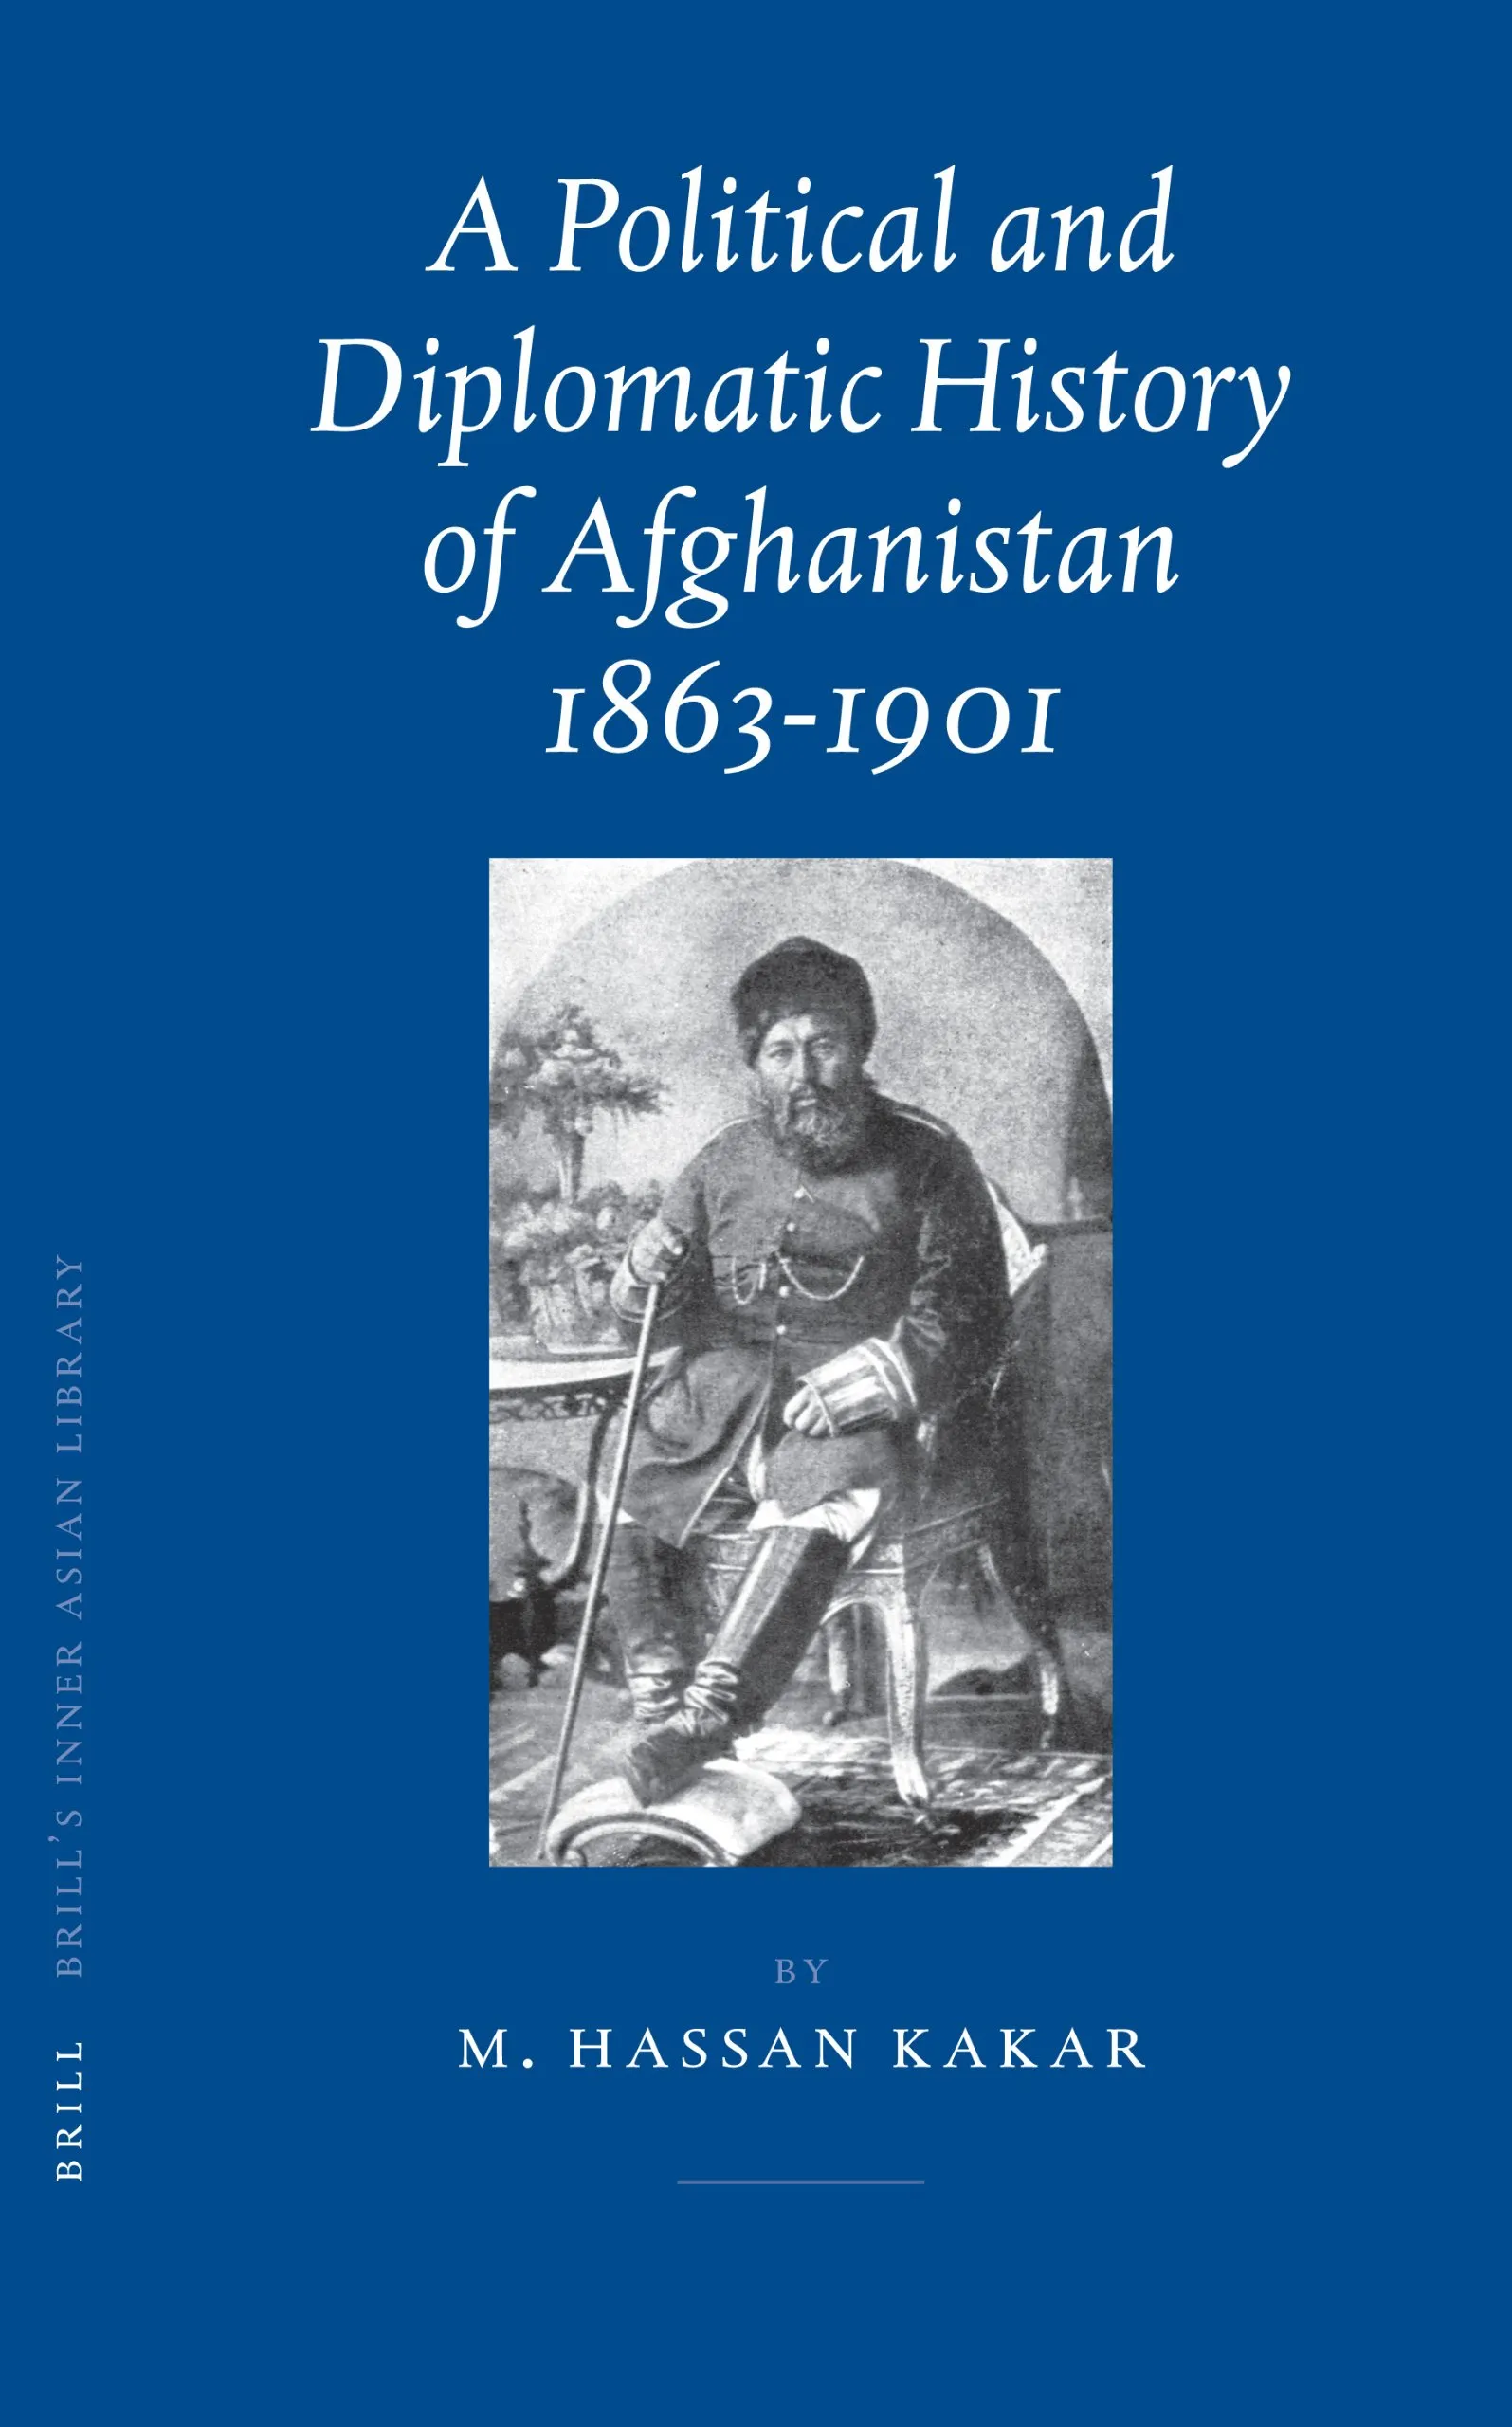 A Political and Diplomatic History of Afghanistan, 1863-1901: 17 (Brill's  Inner Asian Library) : Kakar, Mohammad Hassan: Amazon.in: Books